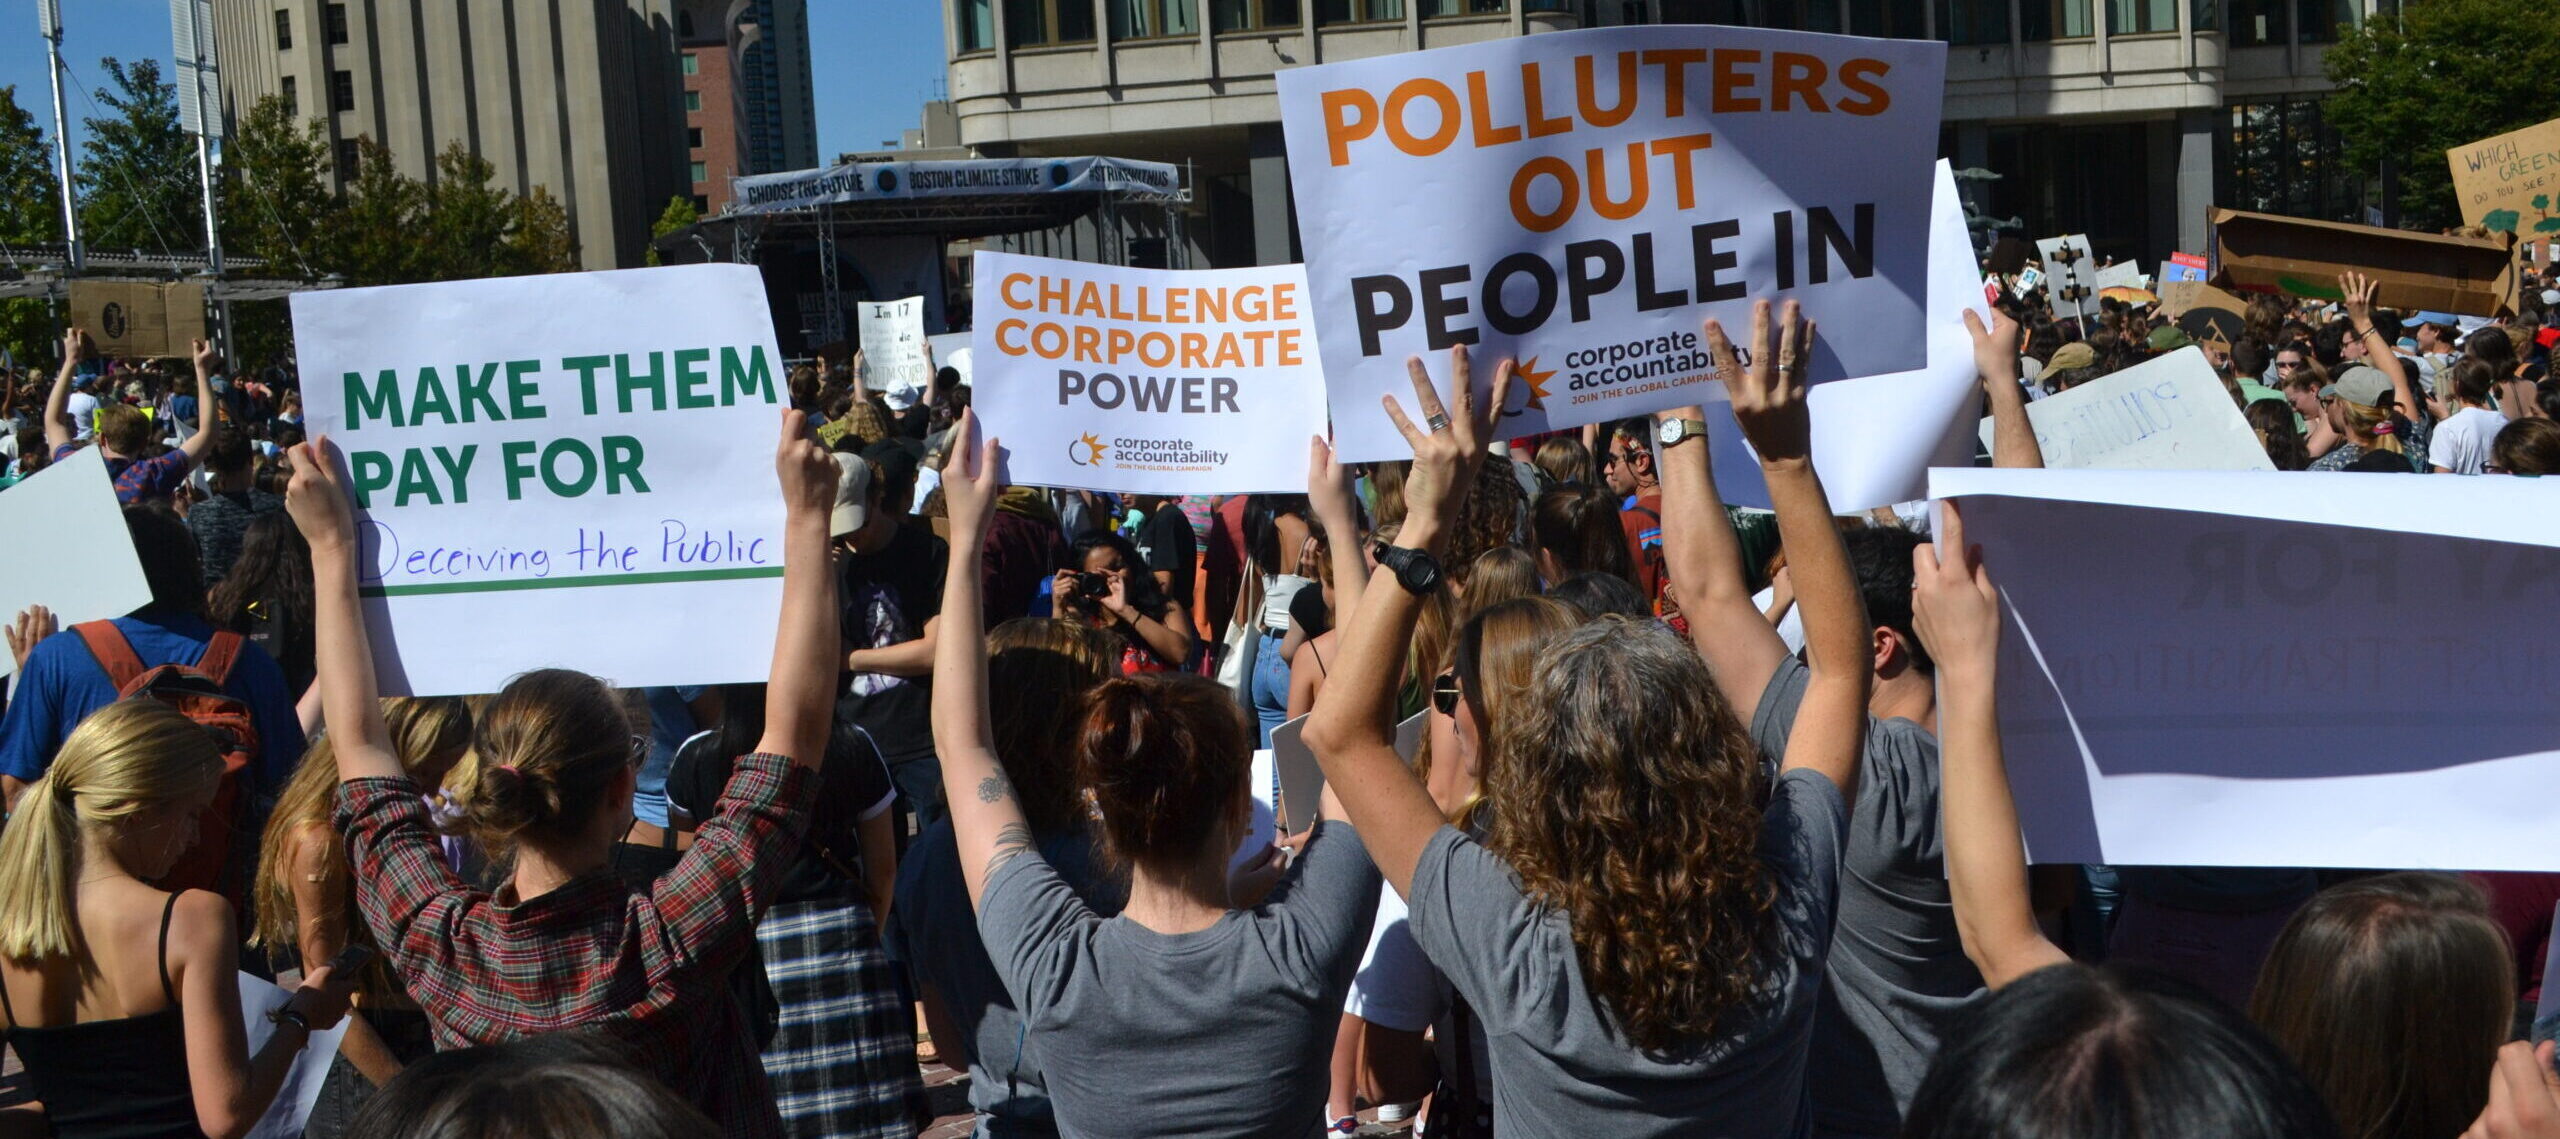 Protesters holding signs that read "Polluters out, people in"